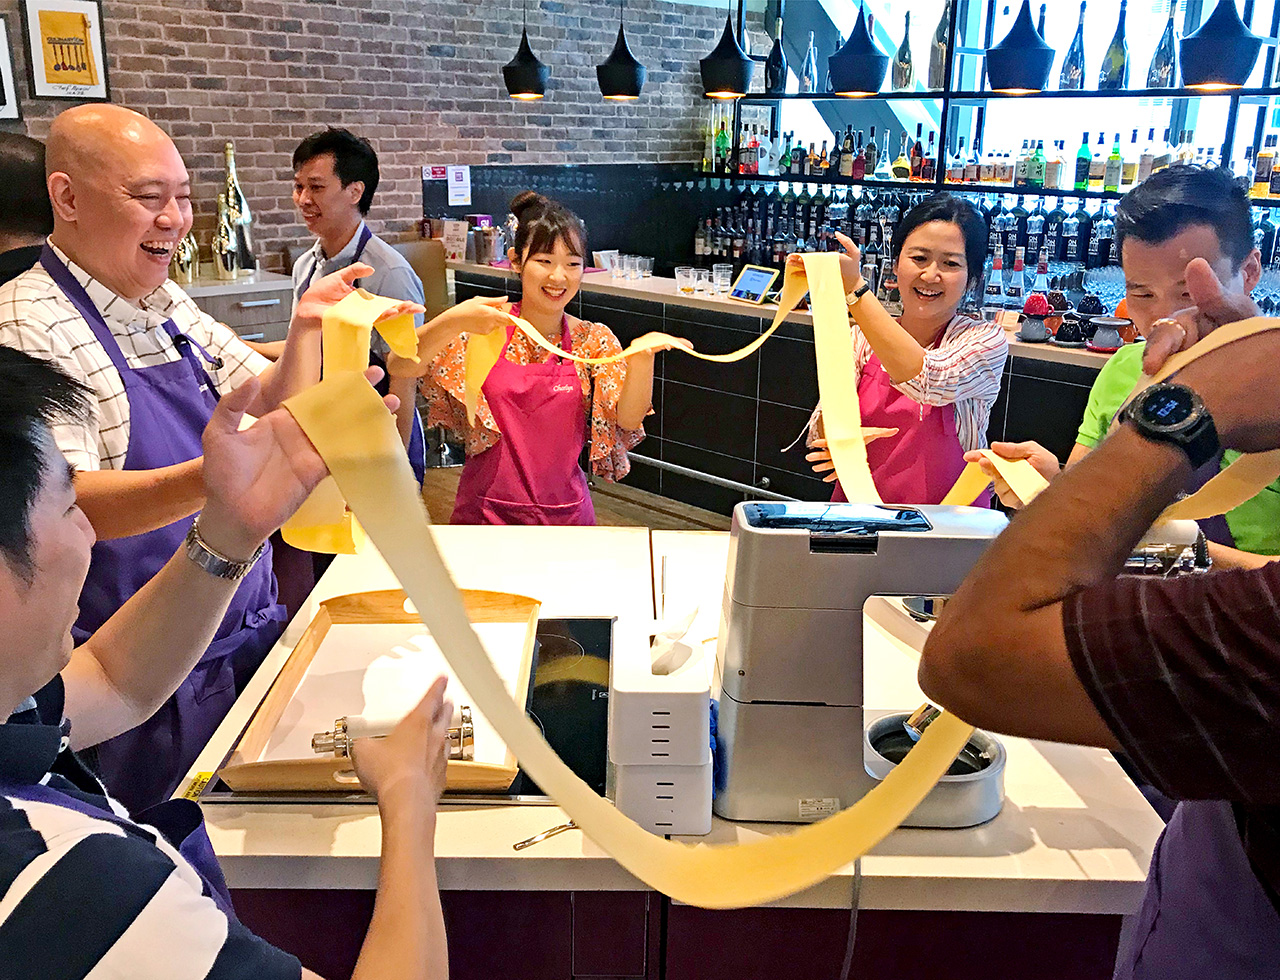 A team of people making dough during a culinary corporate teambuilding activity